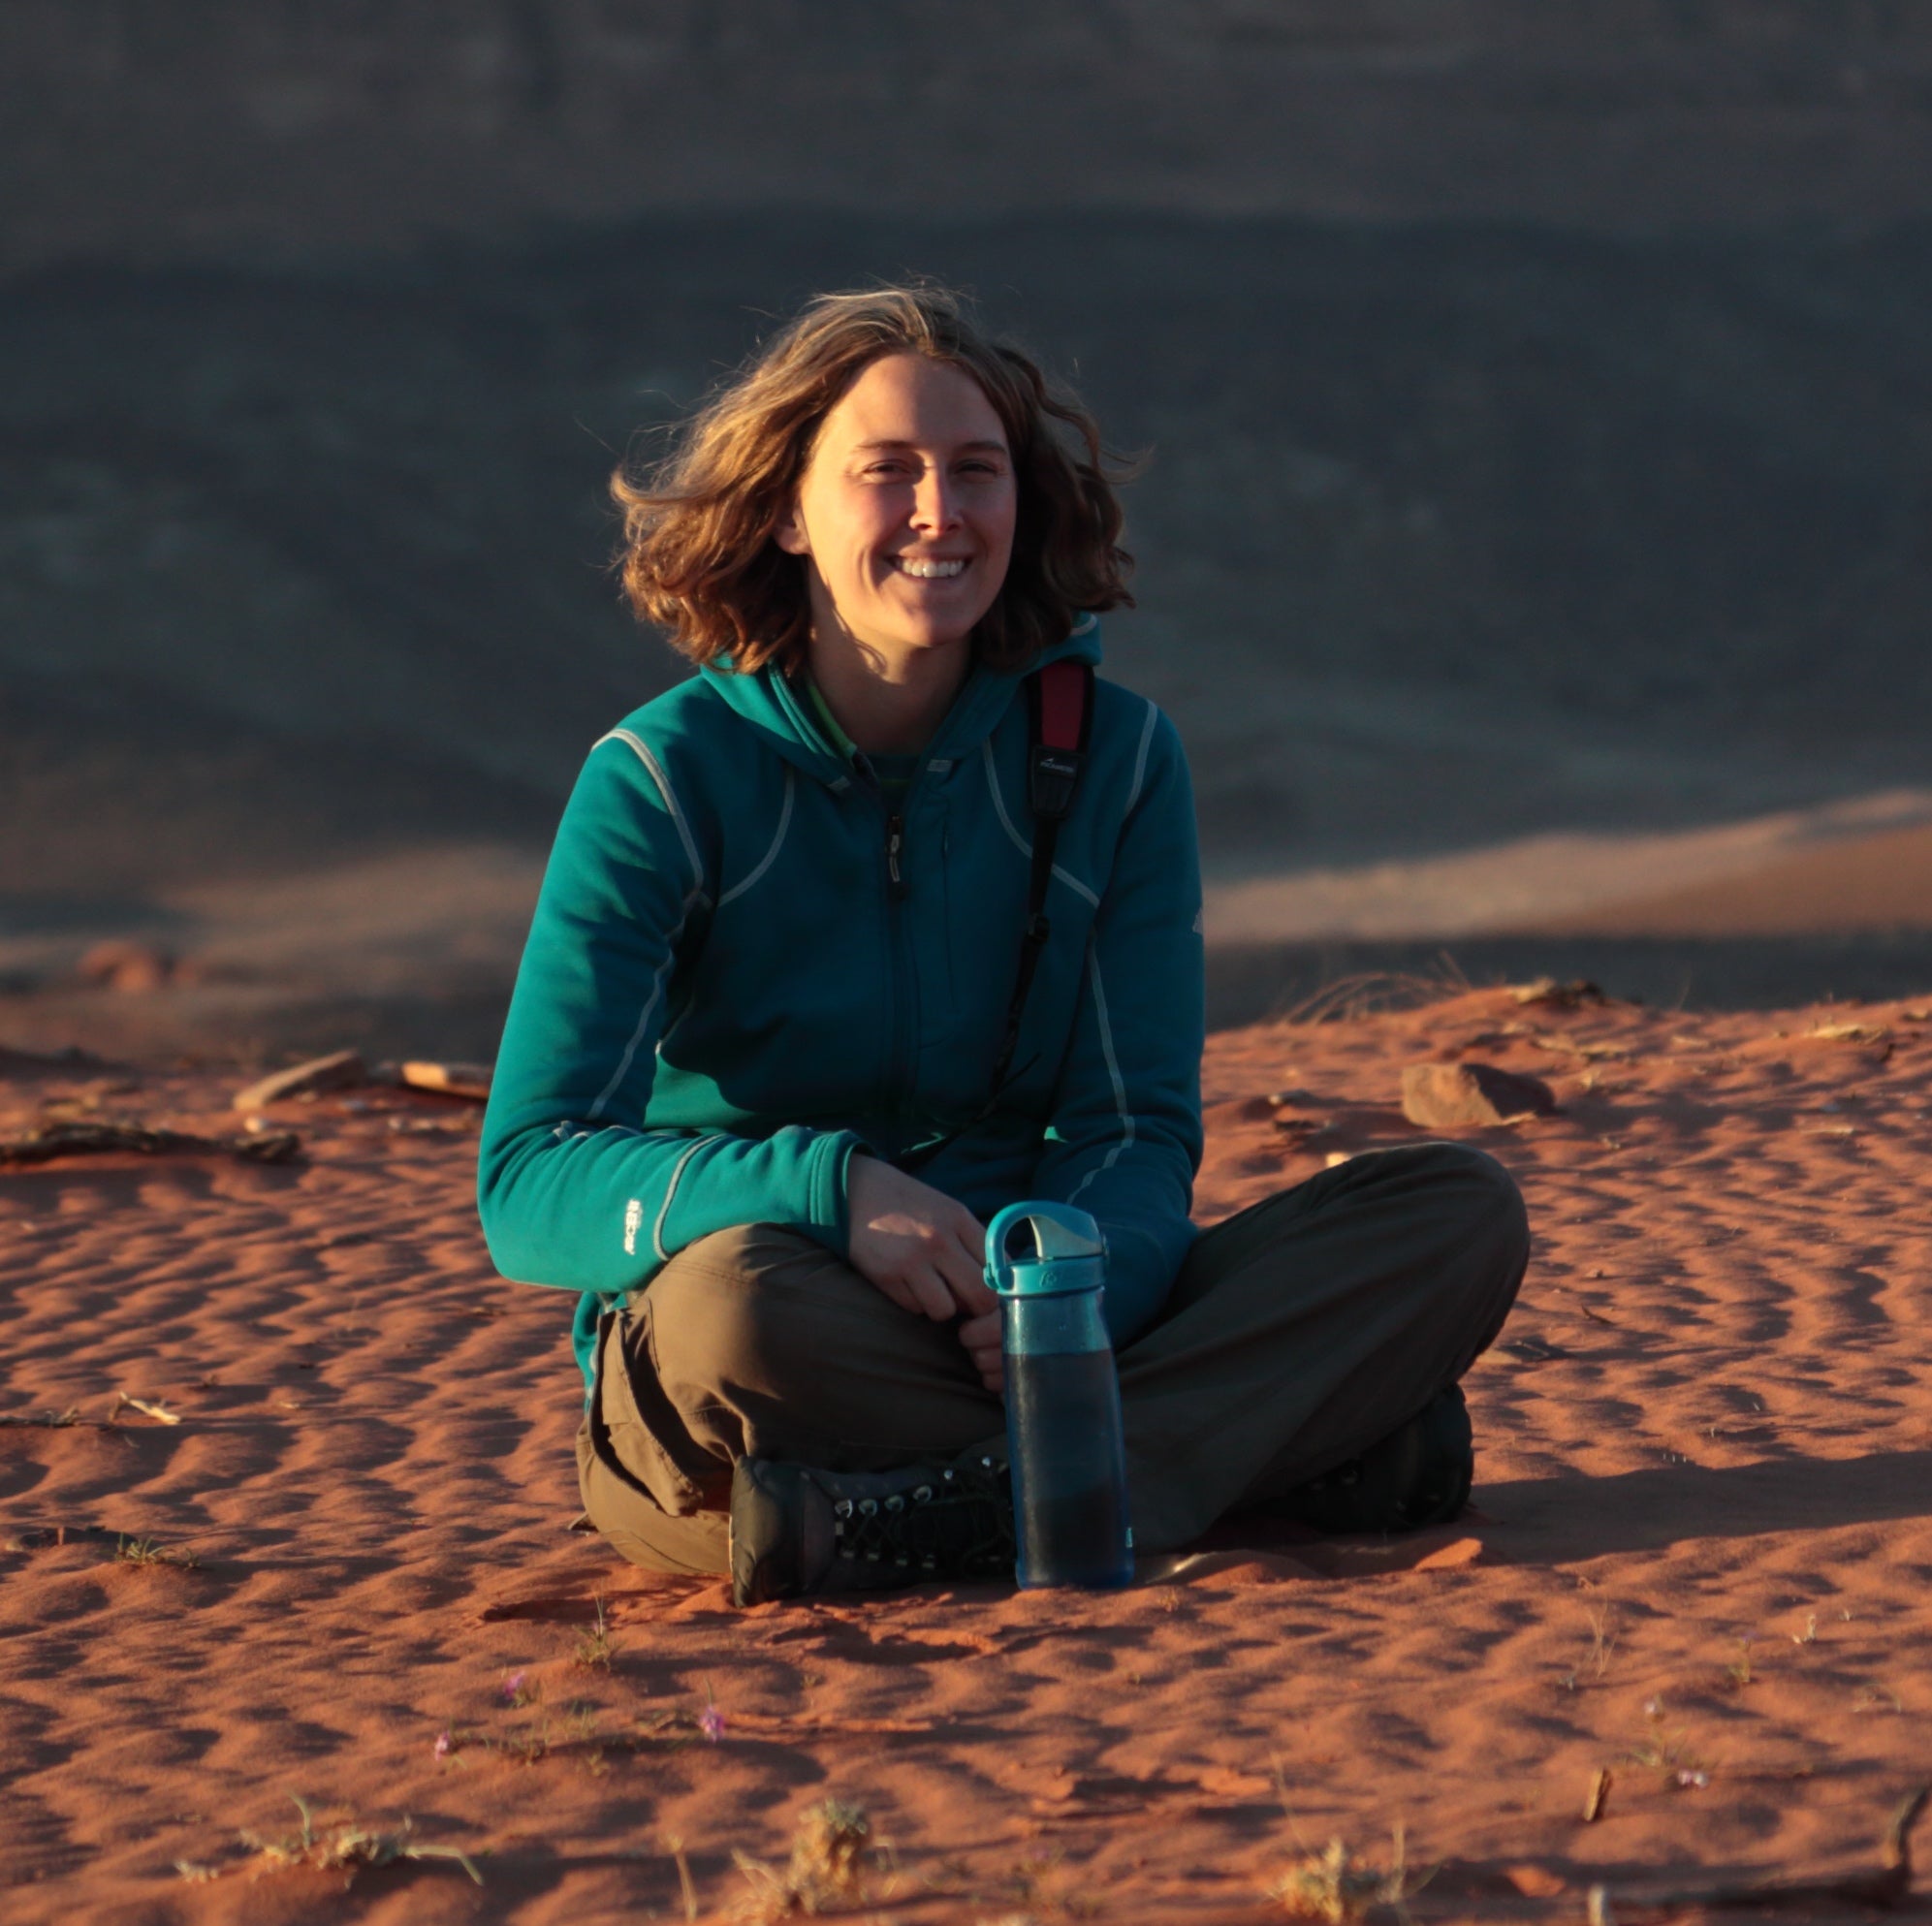 Jessica sits cross-legged in a field of desert sand, a water bottle in front of her and a smile on her face. 